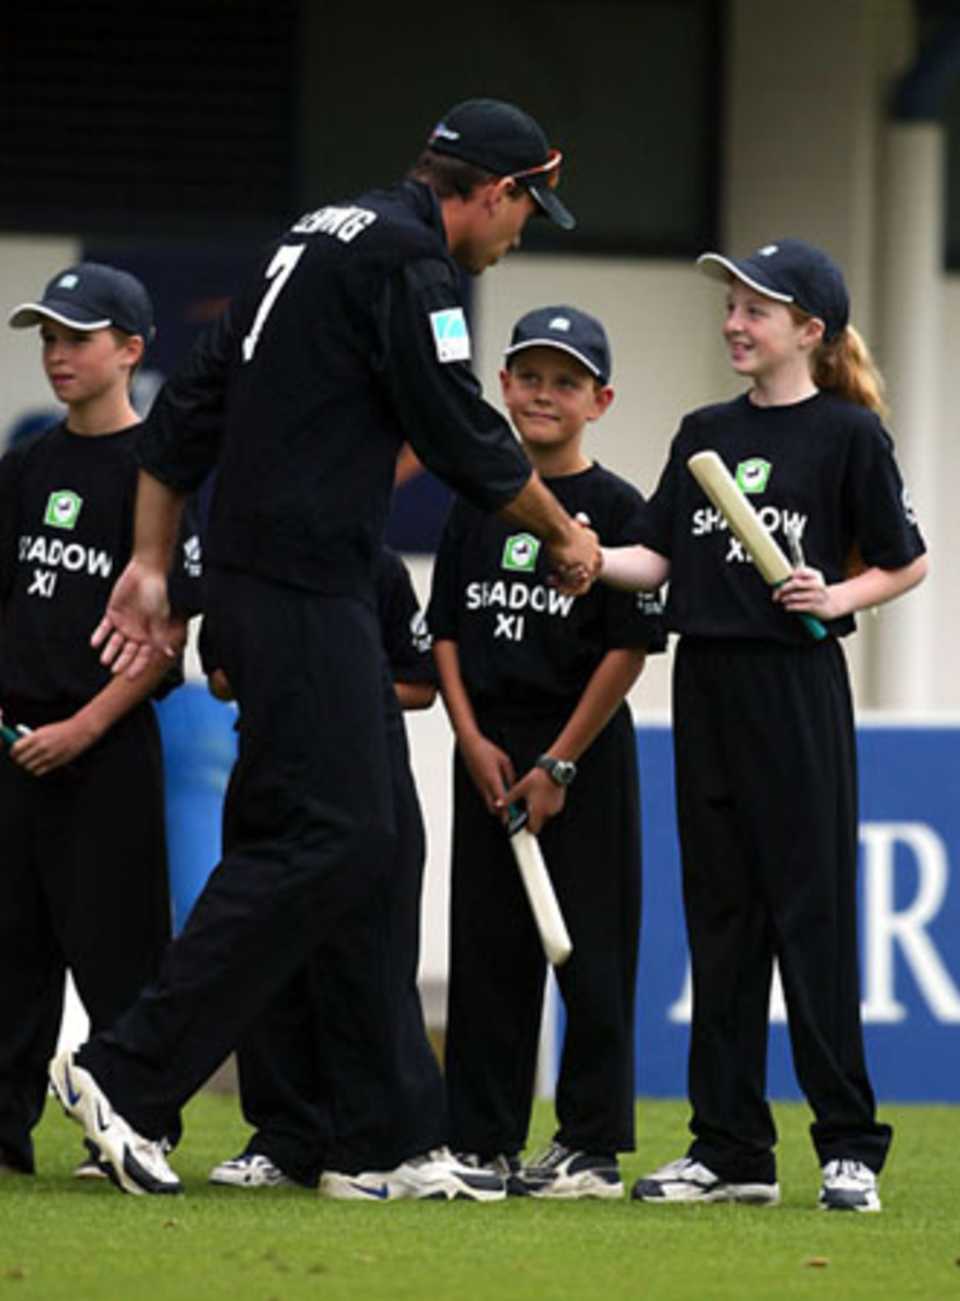 Fleming shakes hands with members of the Shadow XI. 3rd ODI: New Zealand v England at Napier, 20 Feb 2002